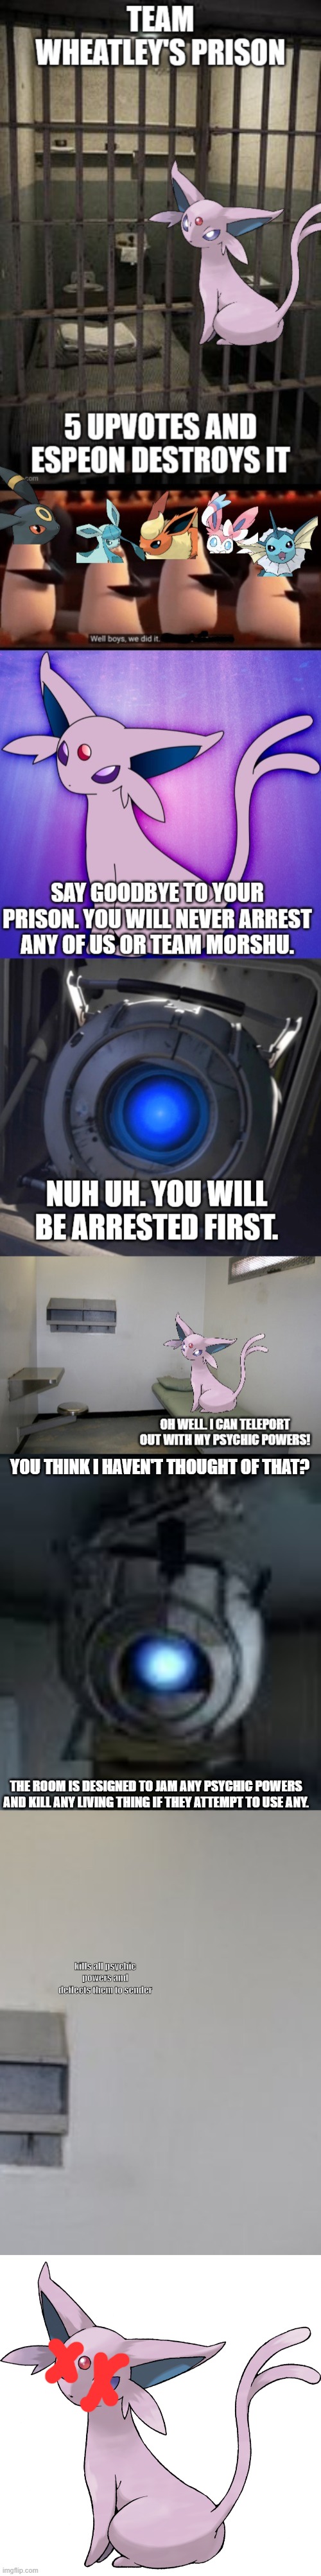 YOU THINK I HAVEN'T THOUGHT OF THAT? THE ROOM IS DESIGNED TO JAM ANY PSYCHIC POWERS AND KILL ANY LIVING THING IF THEY ATTEMPT TO USE ANY. kills all psychic powers and deflects them to sender | image tagged in wheatley serious braindamage,prison cell inside,espeon transparent | made w/ Imgflip meme maker